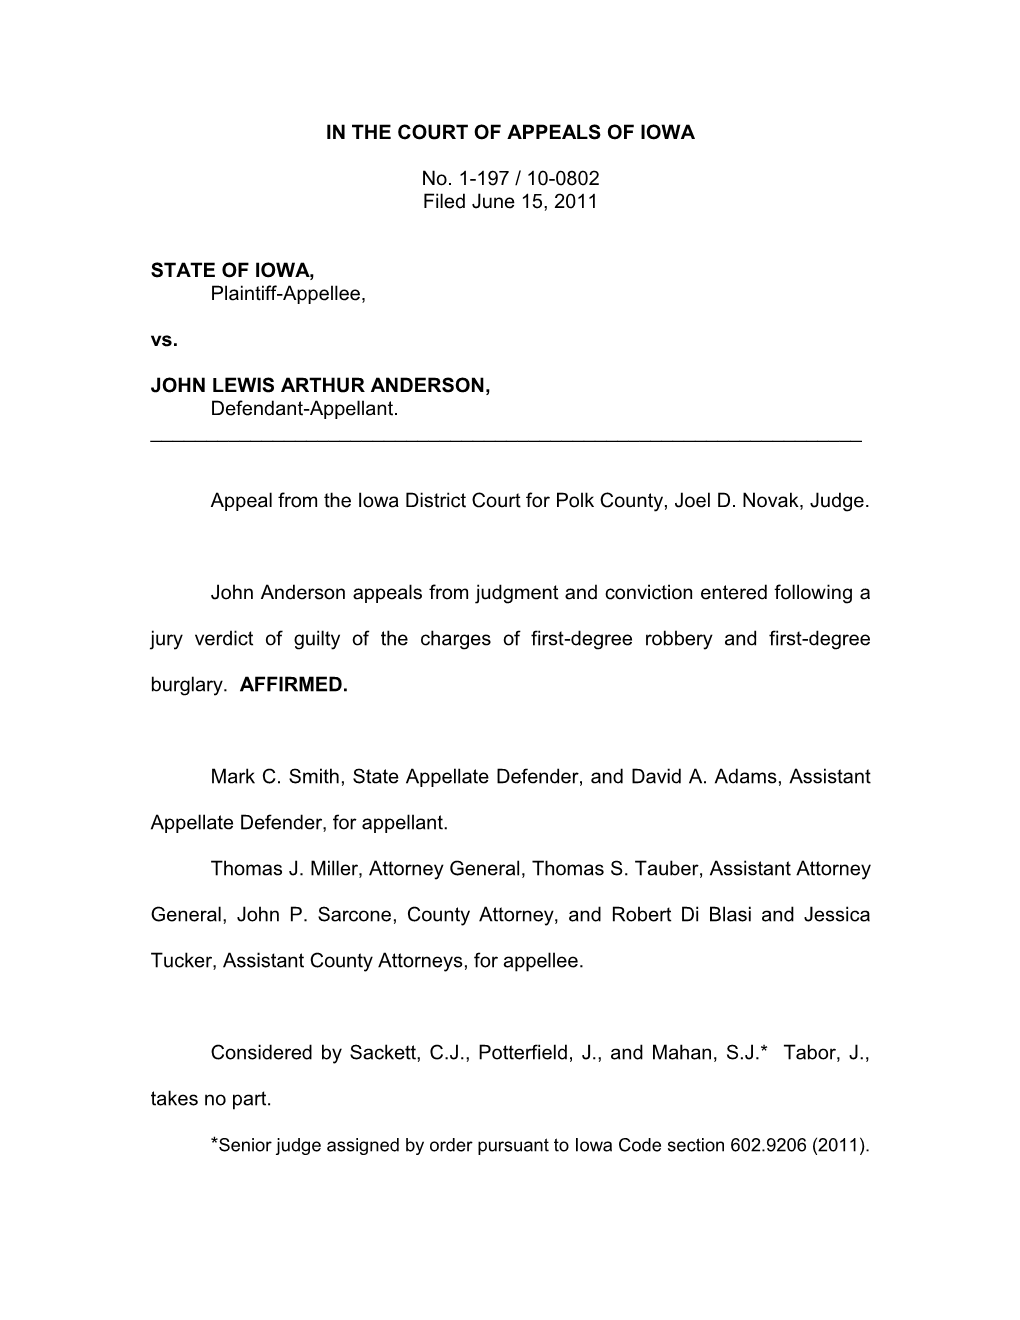 IN the COURT of APPEALS of IOWA No. 1-197 / 10-0802 Filed